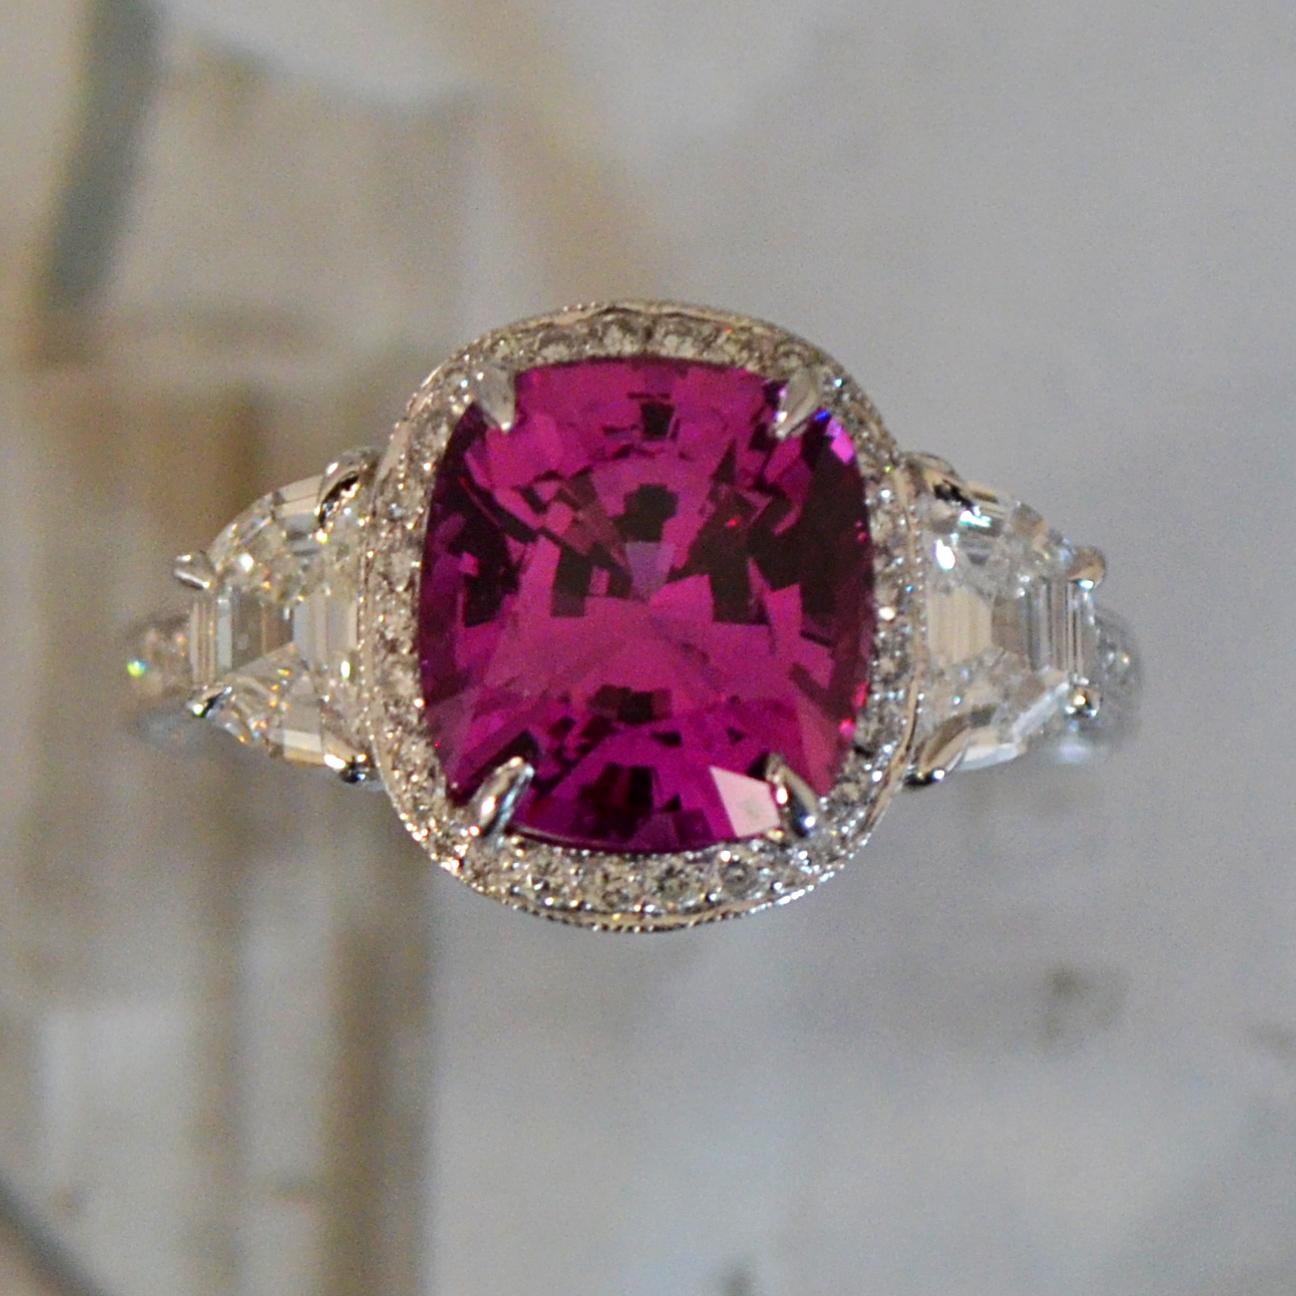 Main Stone Info:

1. Carat Weight: 4.1+ 

2. Color: Pink

3. Tone:  Medium - Nice, 7.0 Out of 10

4. Hue: Fancy Intense Slightly Purplish Pink.

3. Clarity:  Excellent clarity, no inclusions to the eye. VS if diamond rating.

4. Cut: This stone has